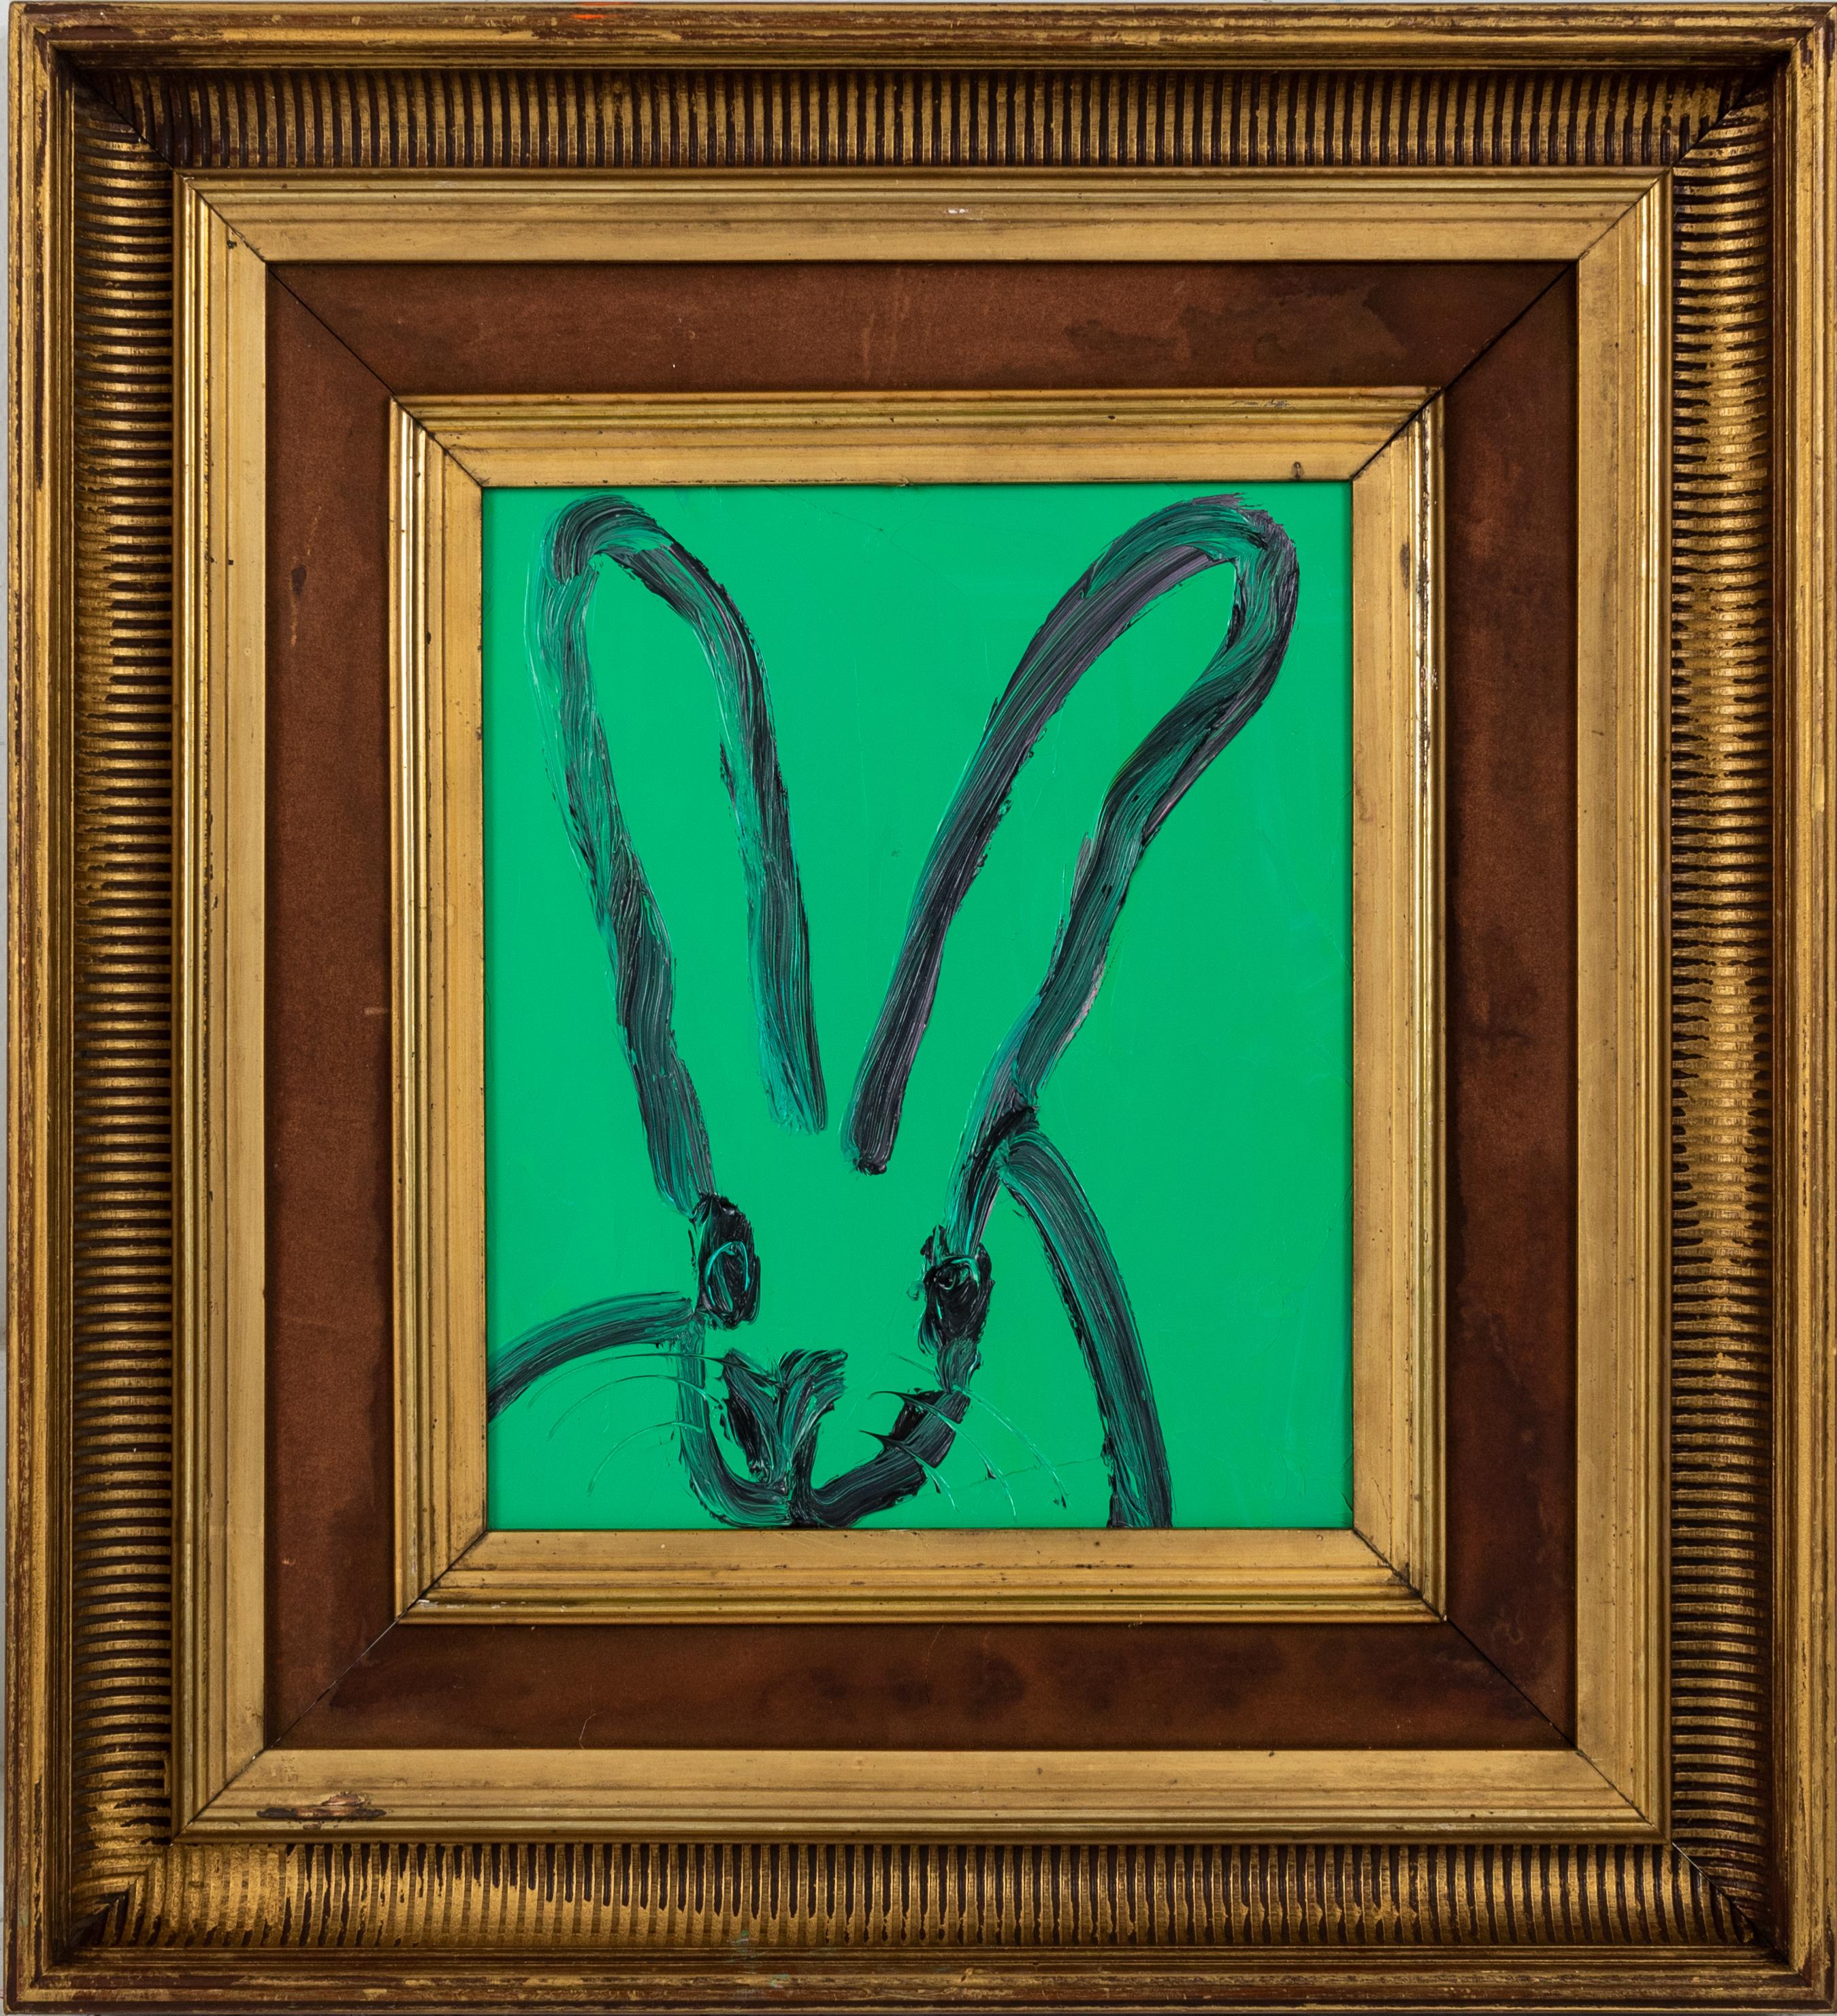 Hunt Slonem "Teal" Green Bunny 
Gestured bunny on a green background in a vintage frame

Unframed: 12.5 x 10 inches  
Framed: 22.5 x 20.5 inches
*Painting is framed - Please note that not all Hunt Slonem frames are not in mint condition. There may